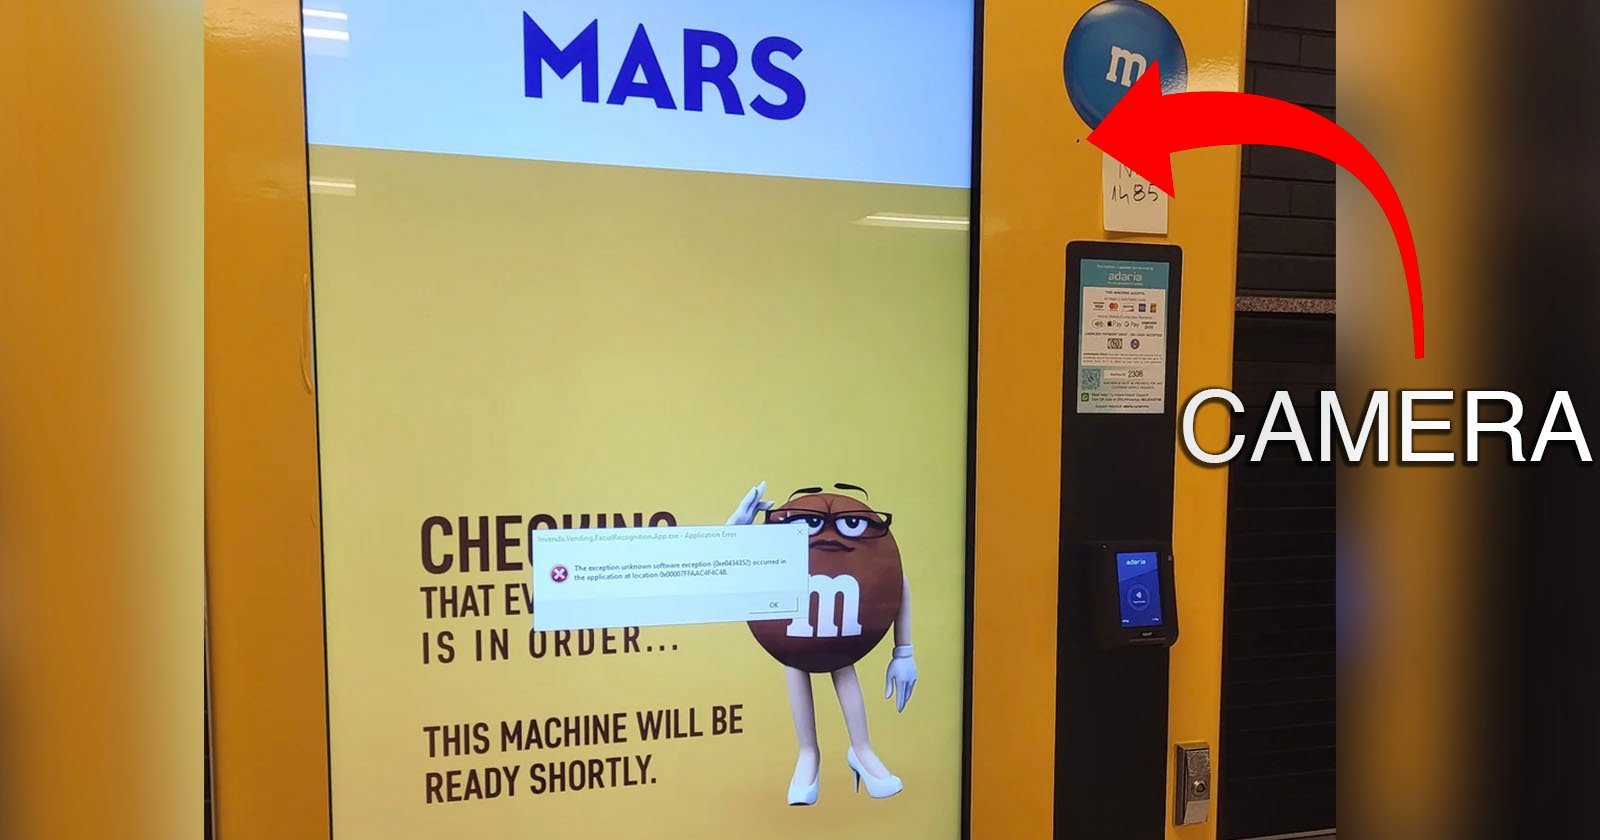 Students Discover M&Ms Vending Machine is Spying on Them